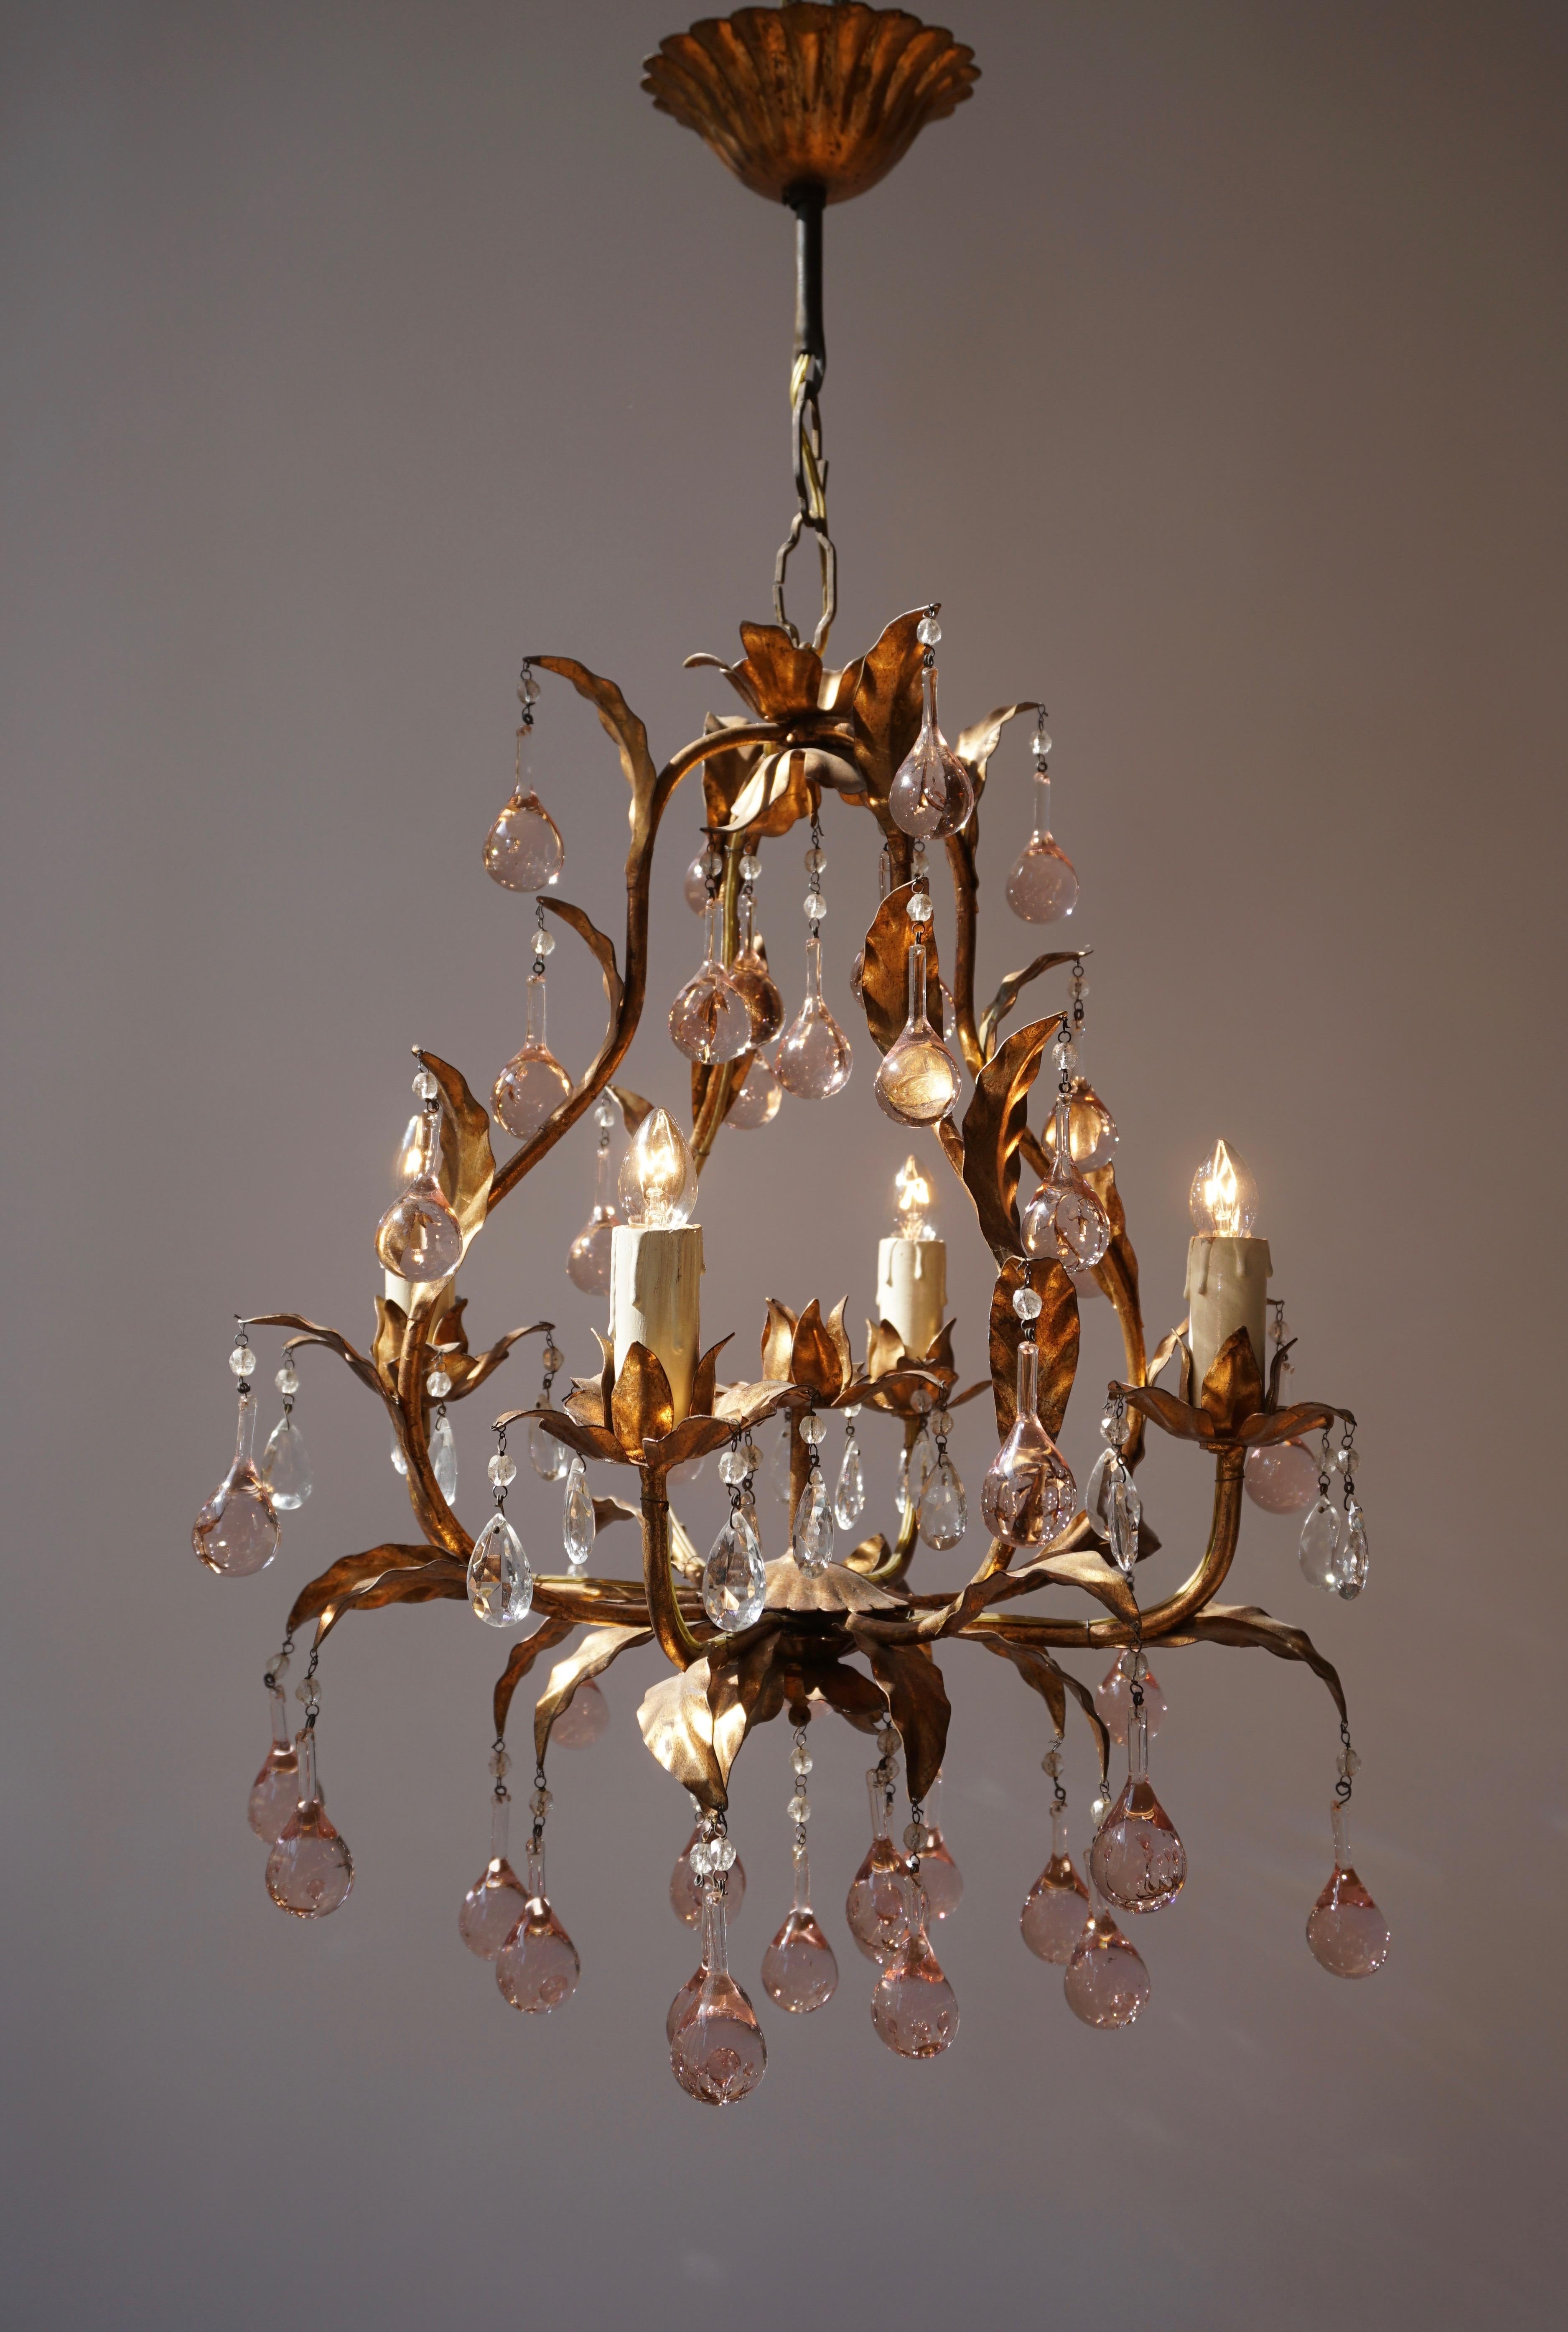 Elegant Italian brass and glass chandelier with five lights.
Measures: Diameter 40 cm.
Height fixture 45 cm.
Total height 70 cm.
Four E14 bulbs.